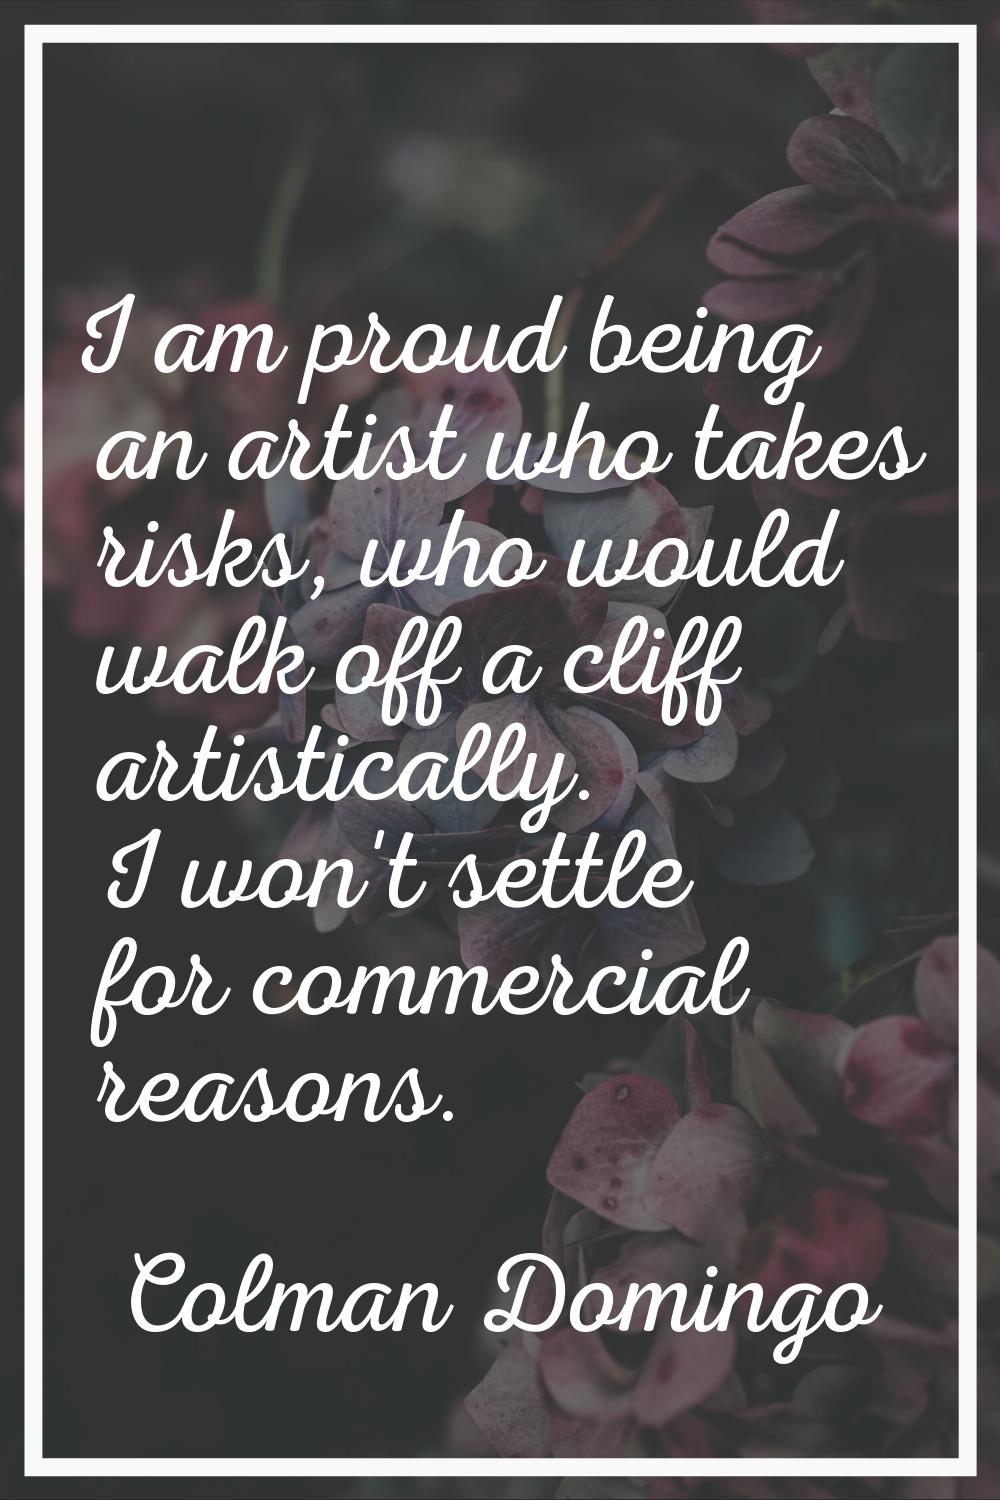 I am proud being an artist who takes risks, who would walk off a cliff artistically. I won't settle